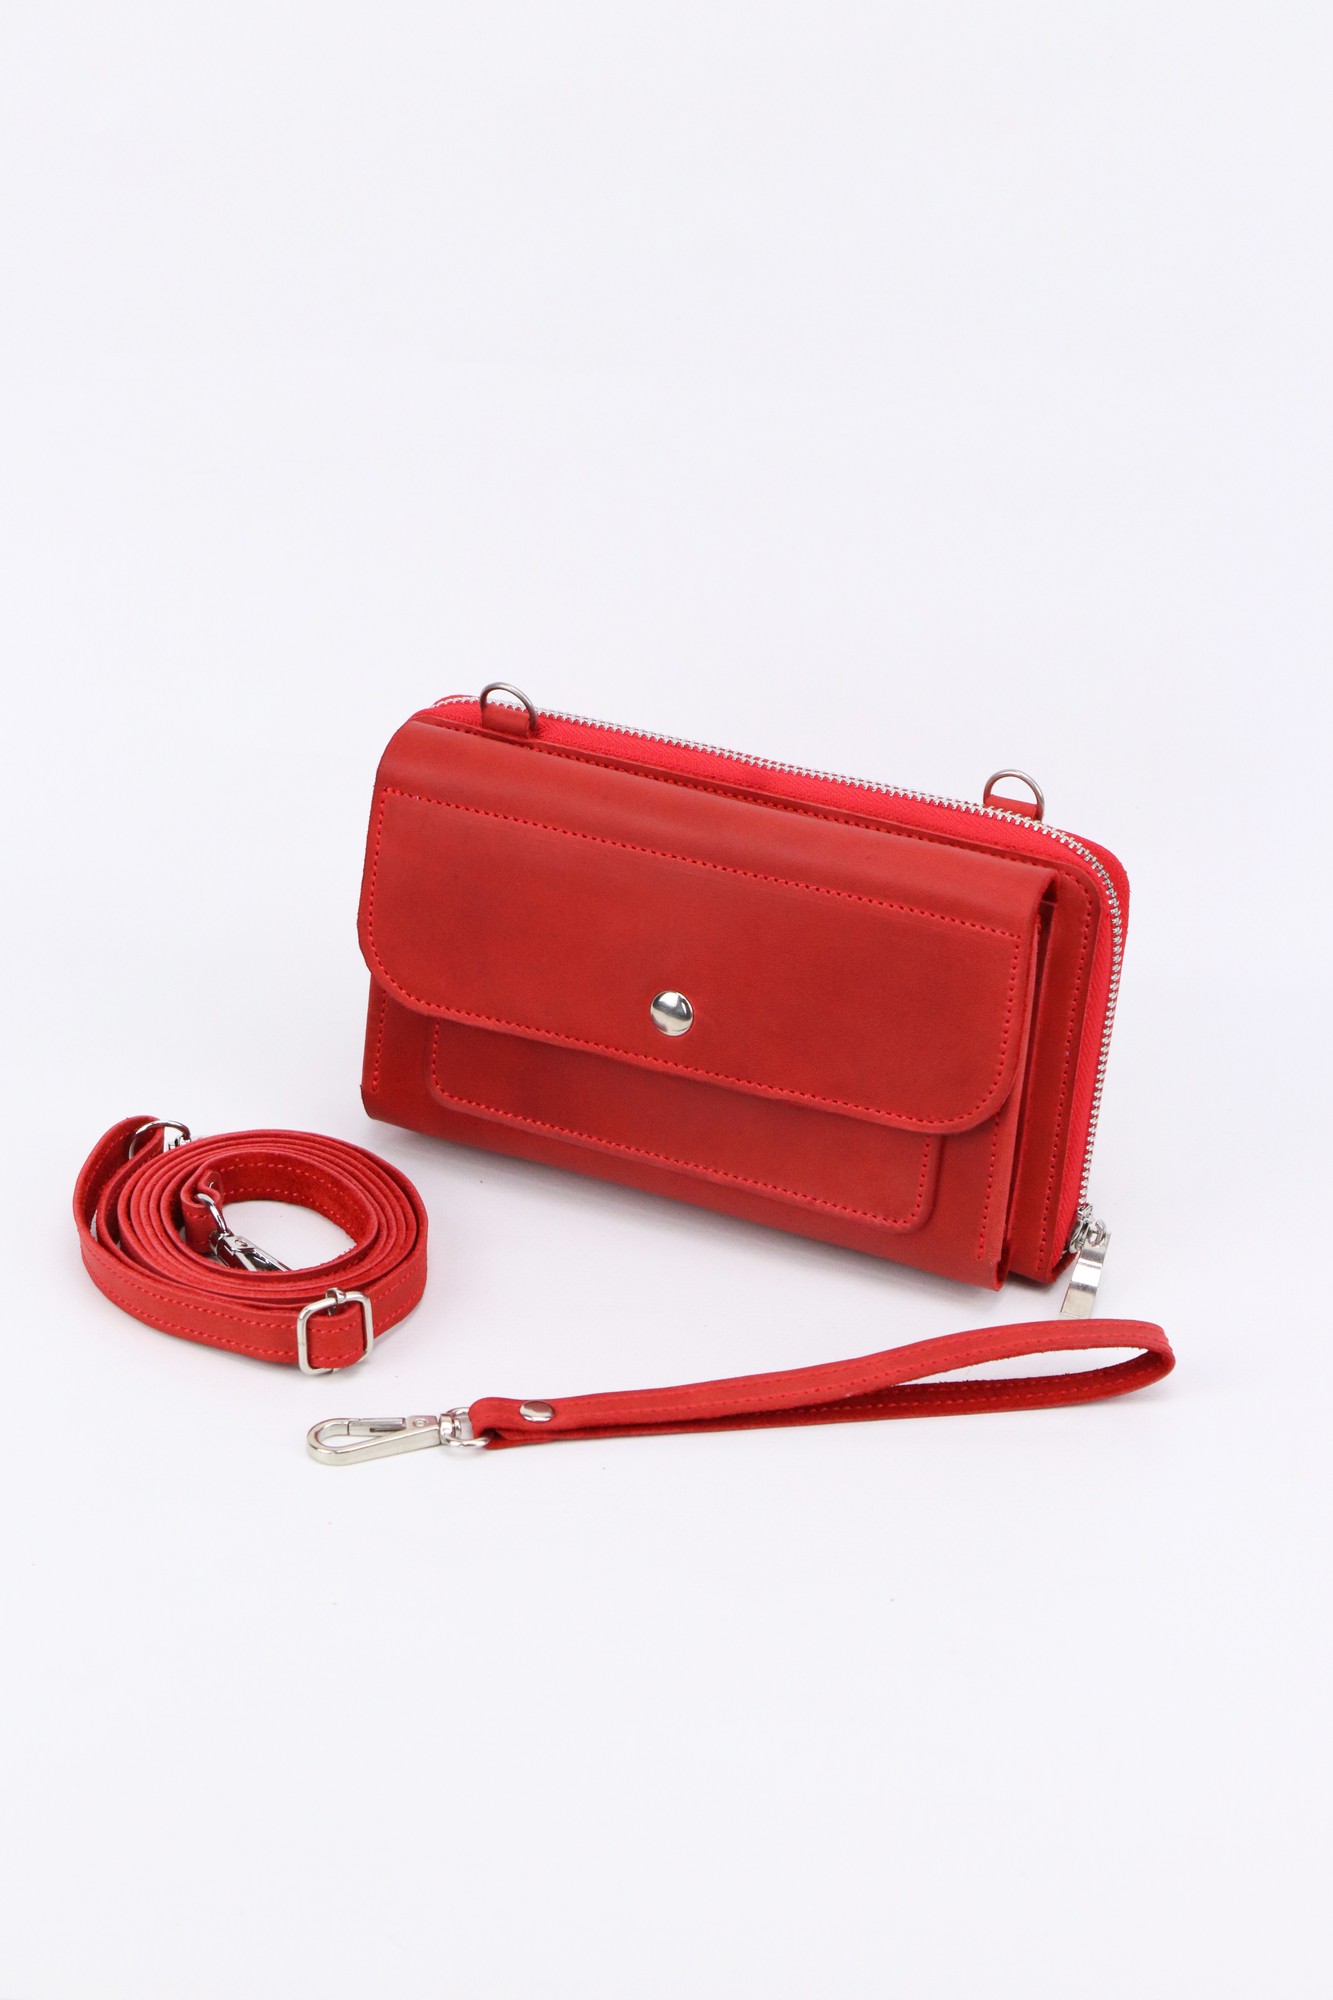 Leather crossbody small bag for women/ purse for iphone 14 with wrist strap/ red/ 1011 - 24065 from with donate to u24